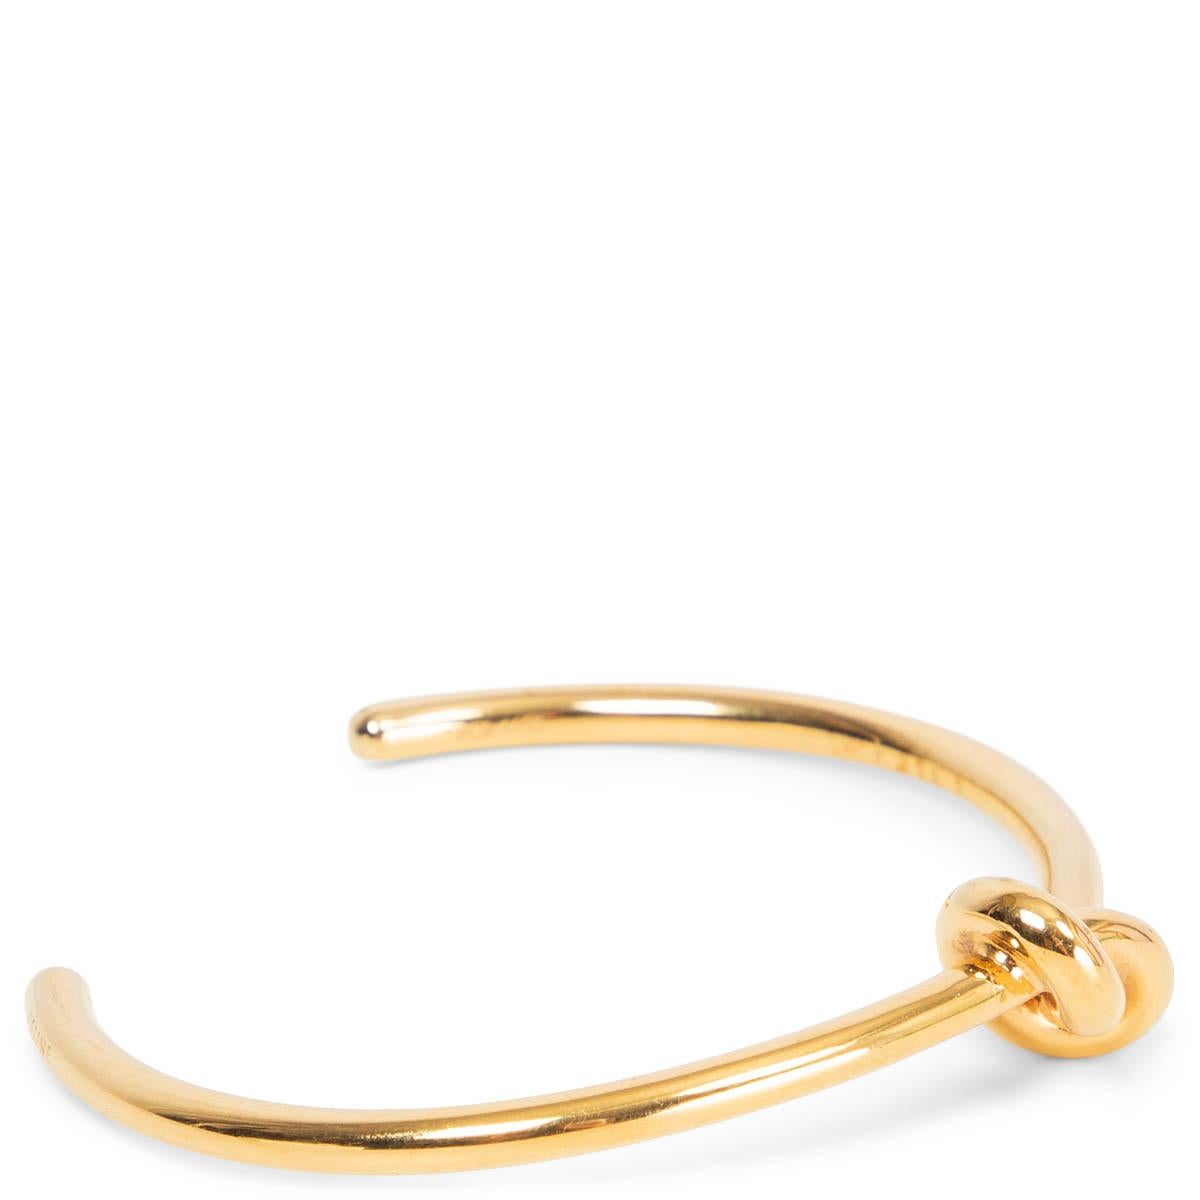 100% authentic Céline Extra Thin Open Knot Bracelet in gold-plated brass. Brand new. Comes with dust bag and box. 

All our listings include only the listed item unless otherwise specified in the description above.